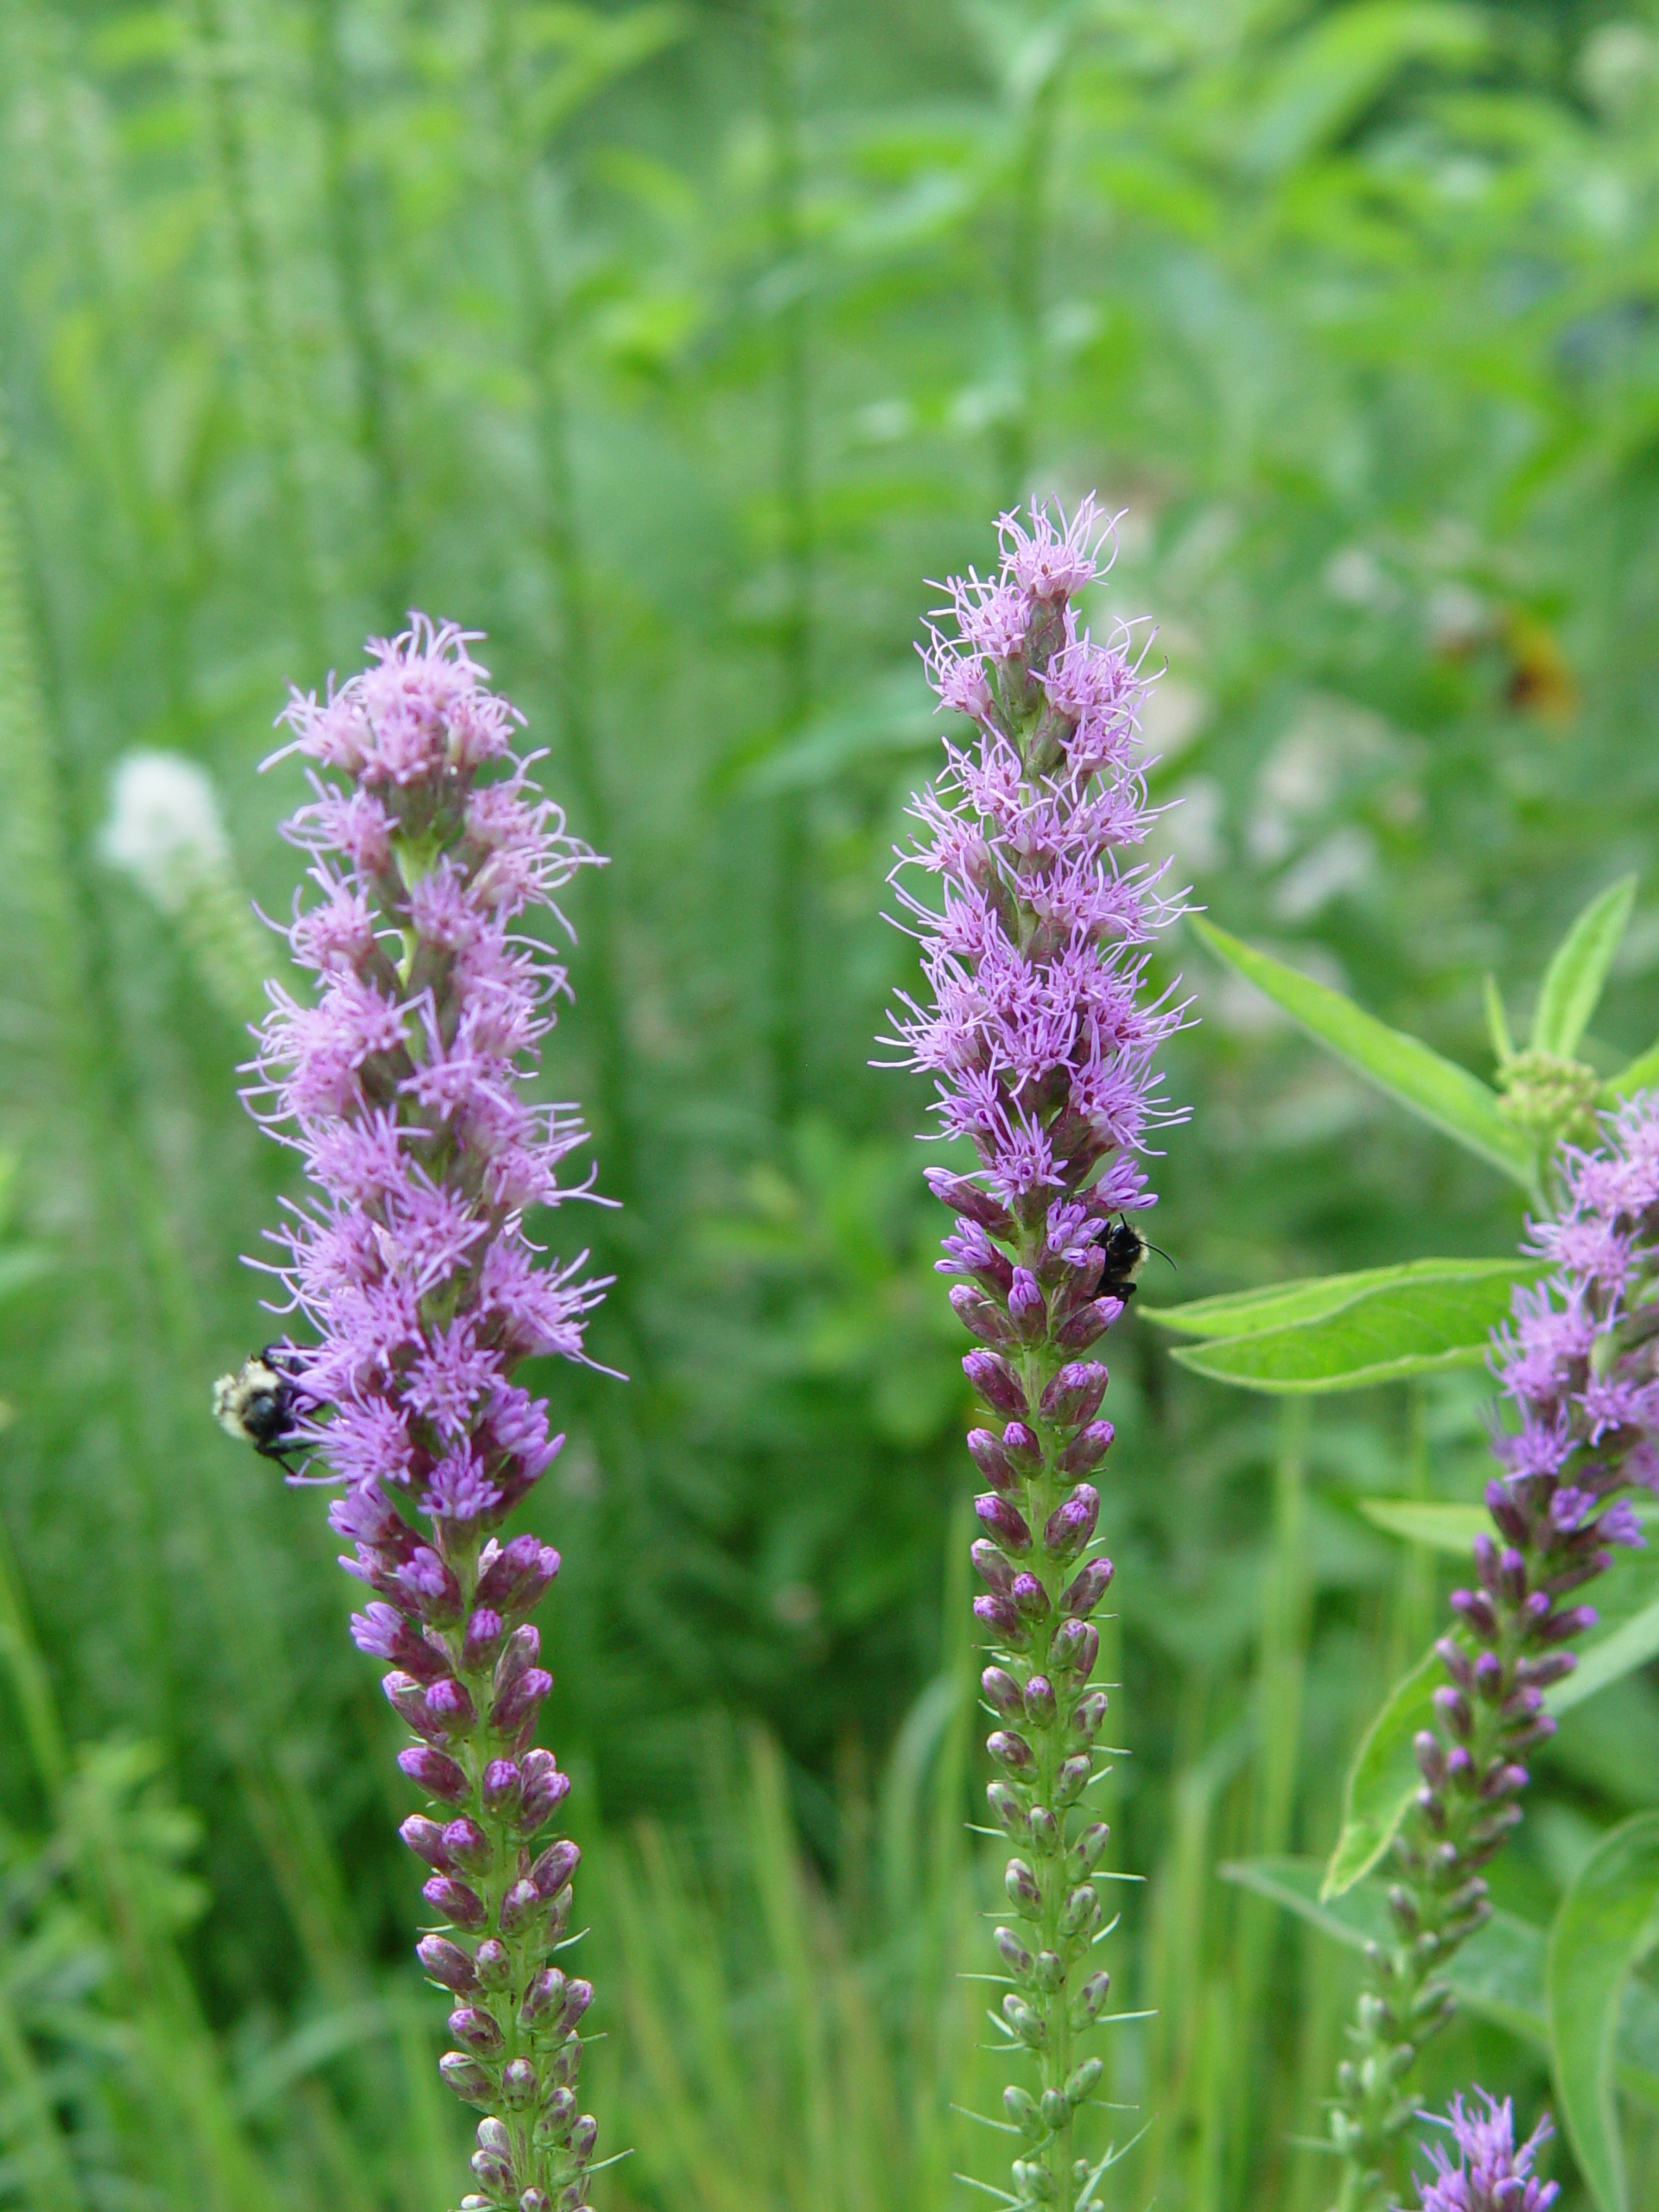 Liatris spicata – Blazing Star – The Anther's Promise